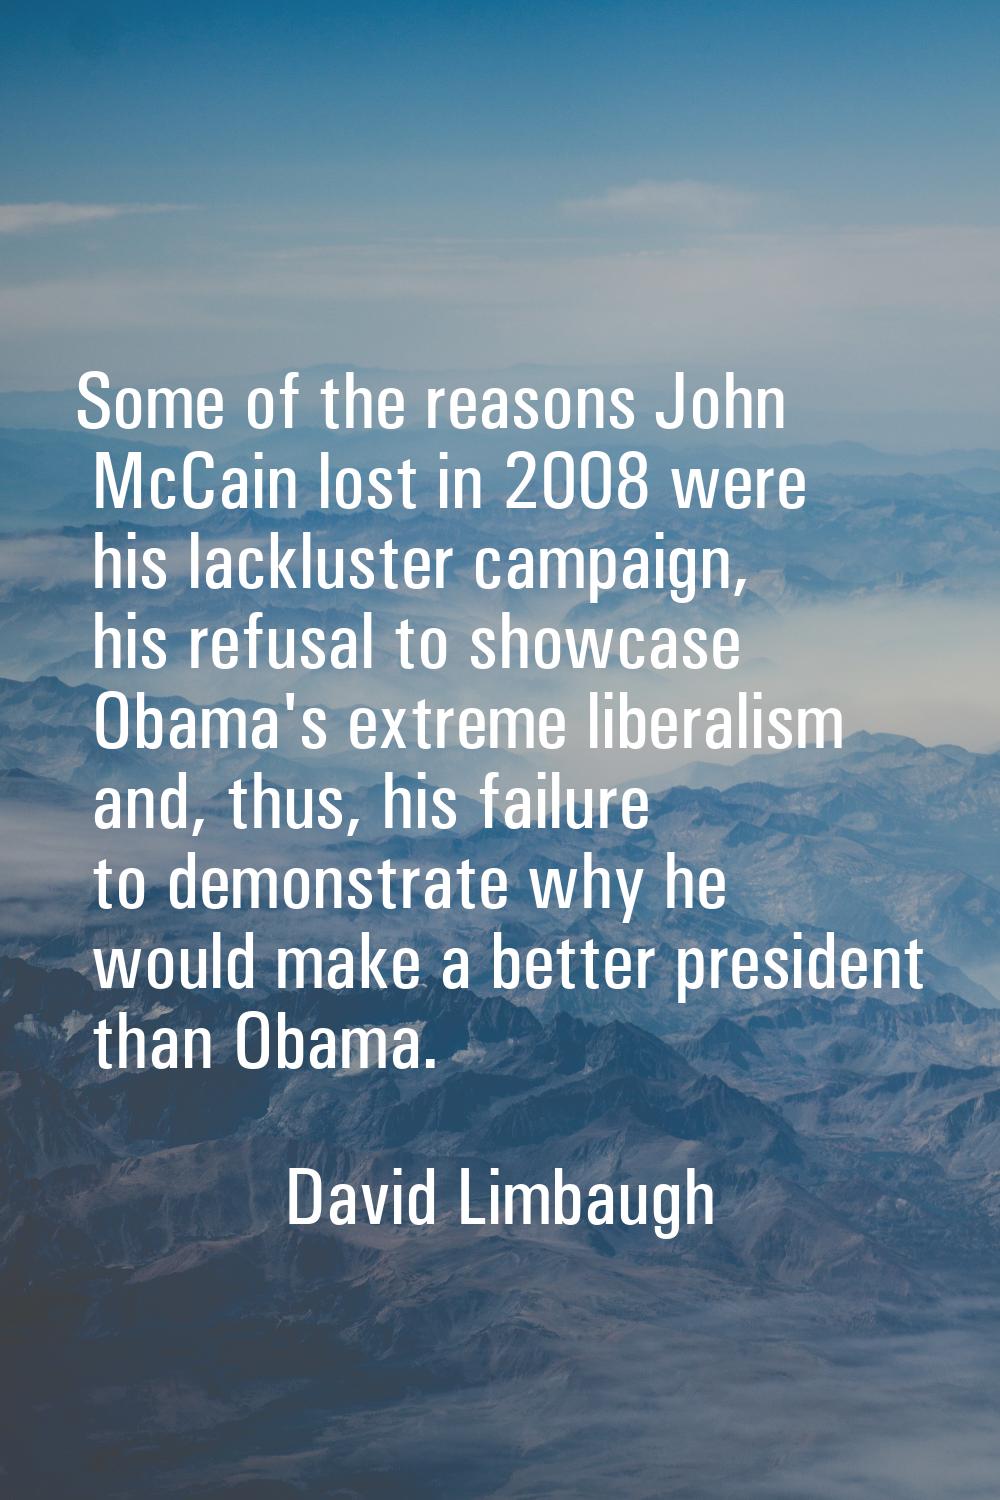 Some of the reasons John McCain lost in 2008 were his lackluster campaign, his refusal to showcase 